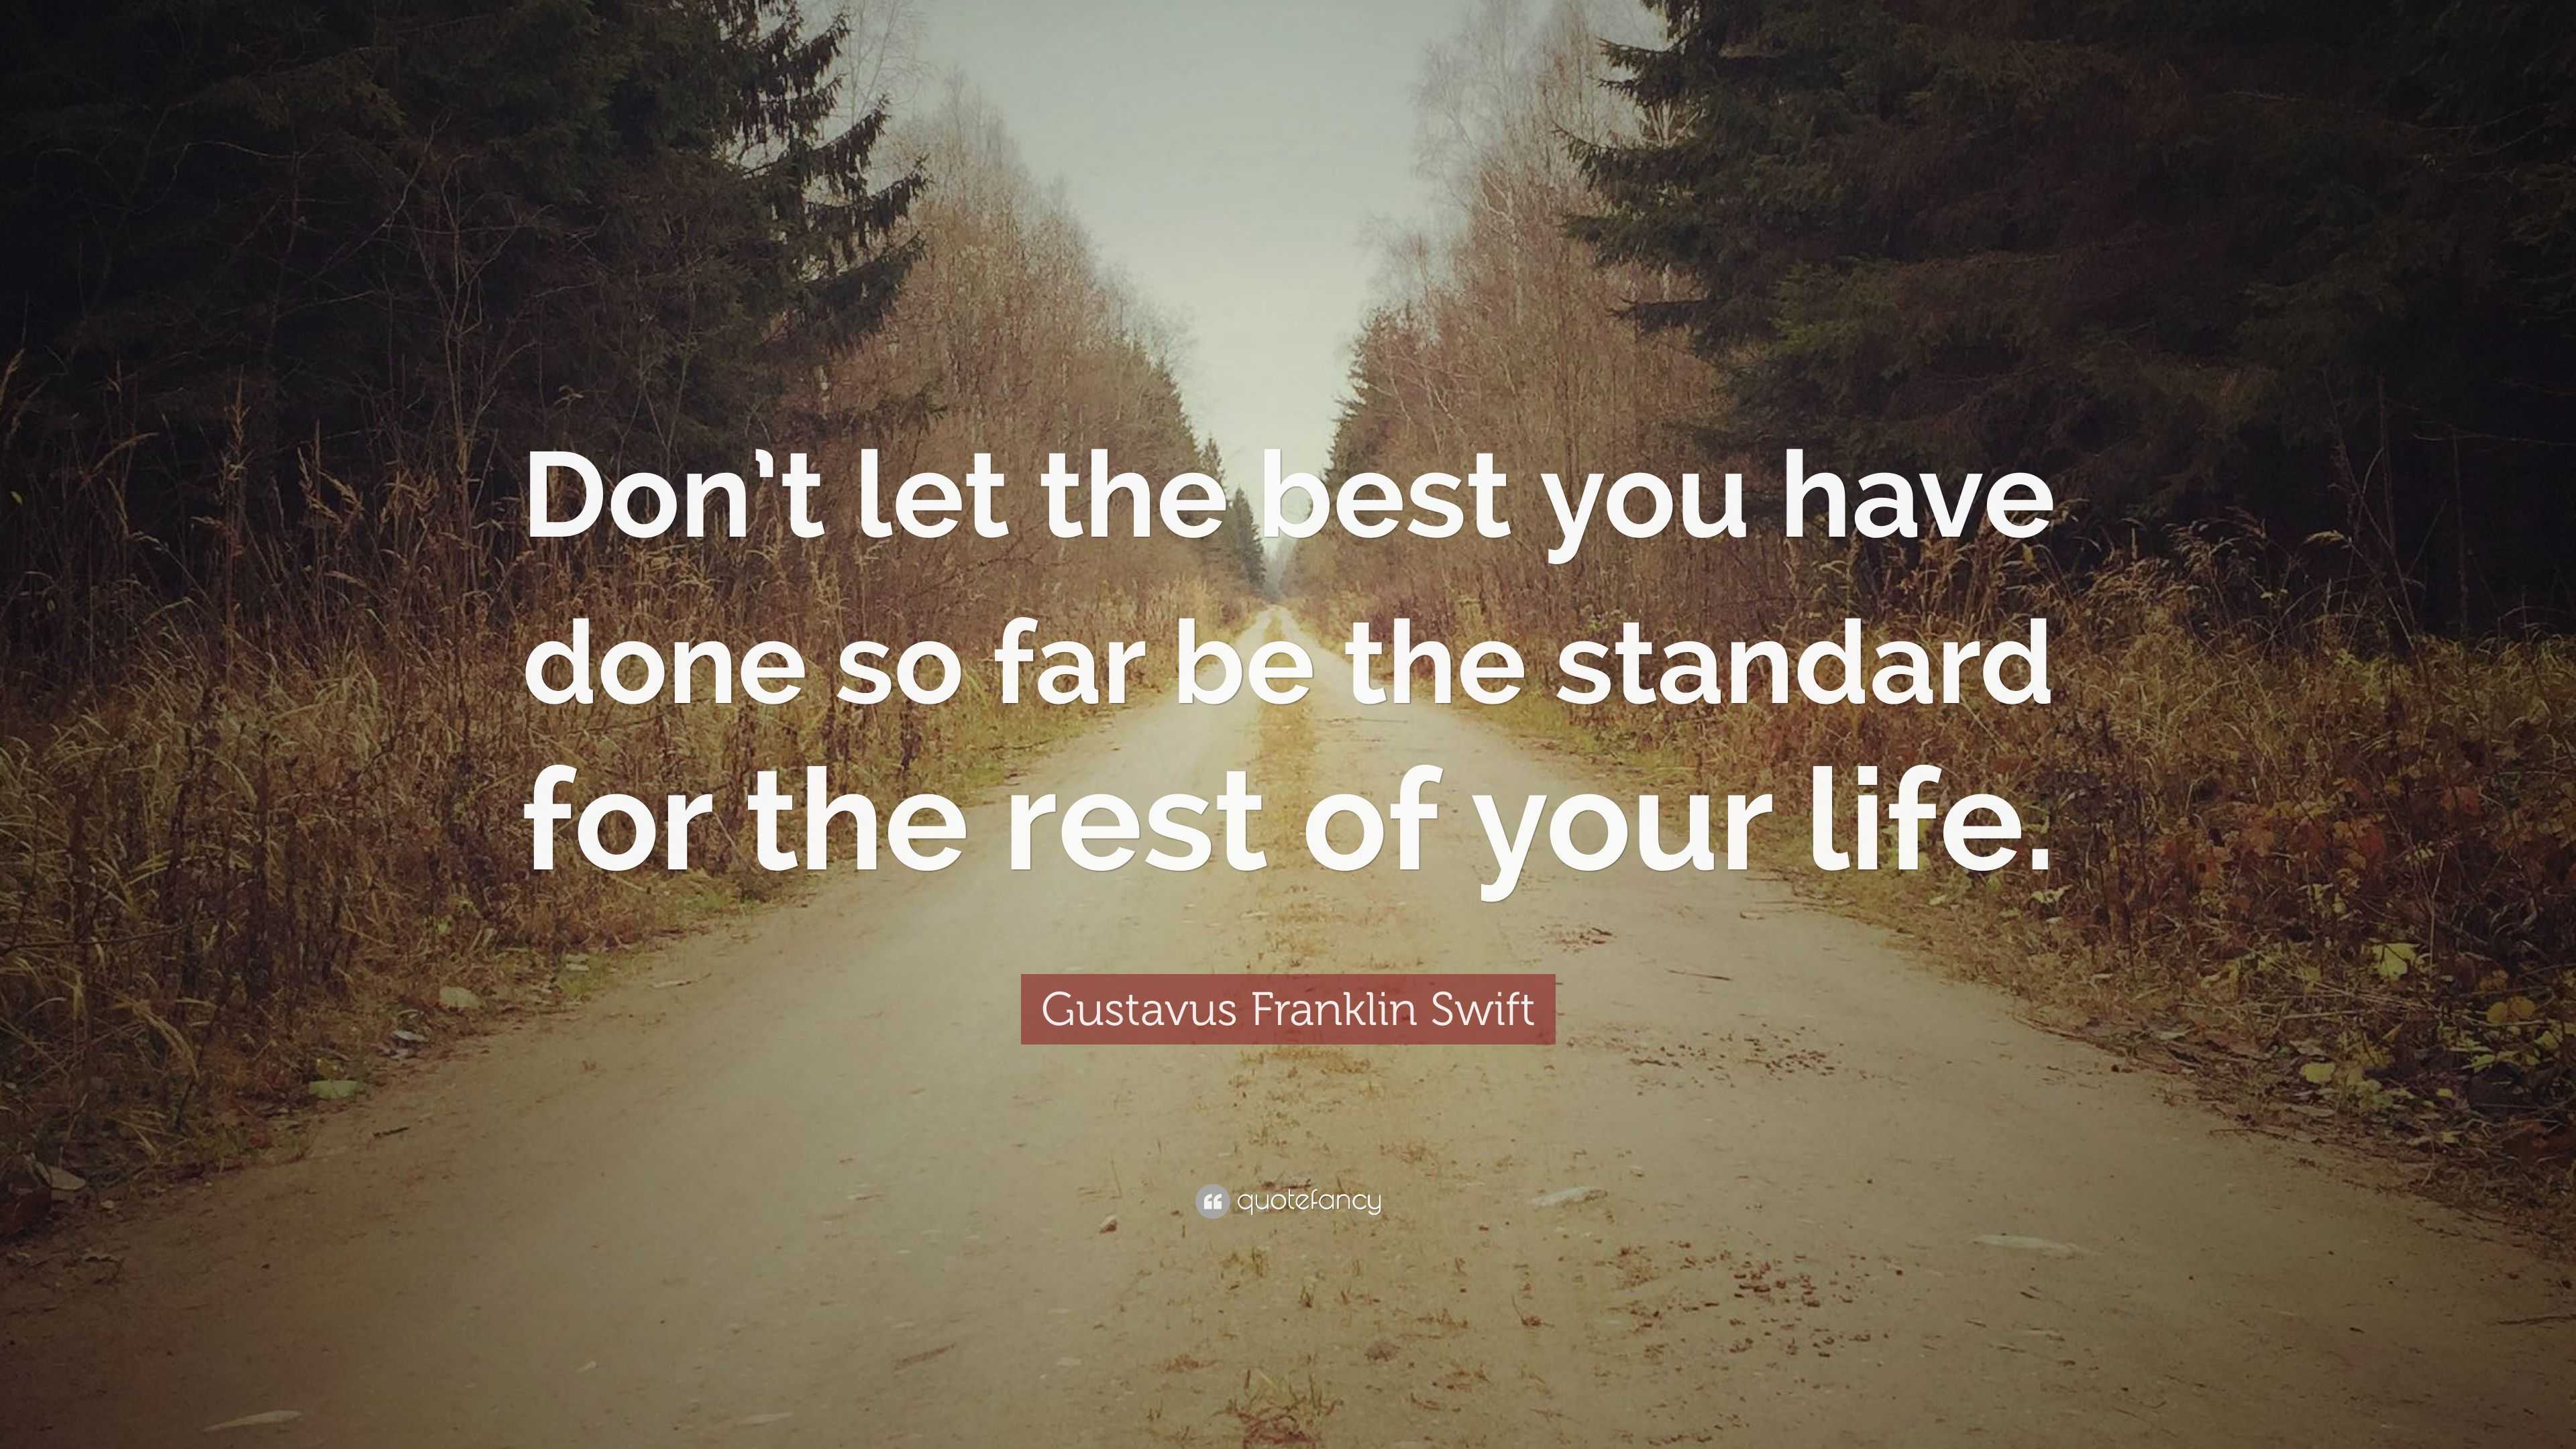 Gustavus Franklin Swift Quote: “Don’t let the best you have done so far ...